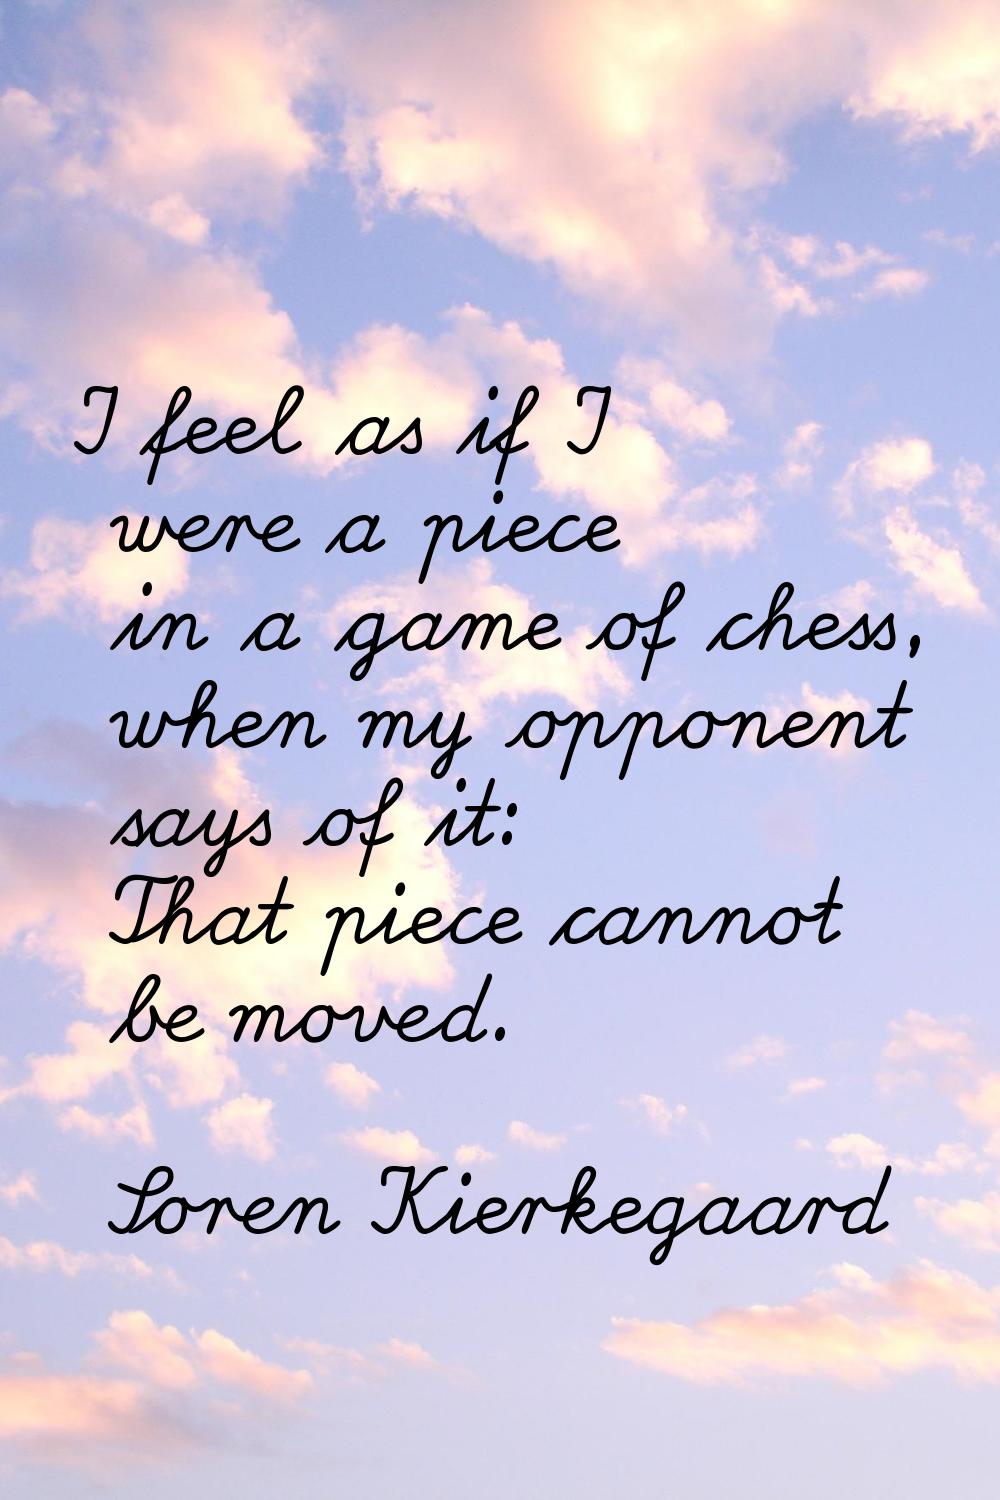 I feel as if I were a piece in a game of chess, when my opponent says of it: That piece cannot be m